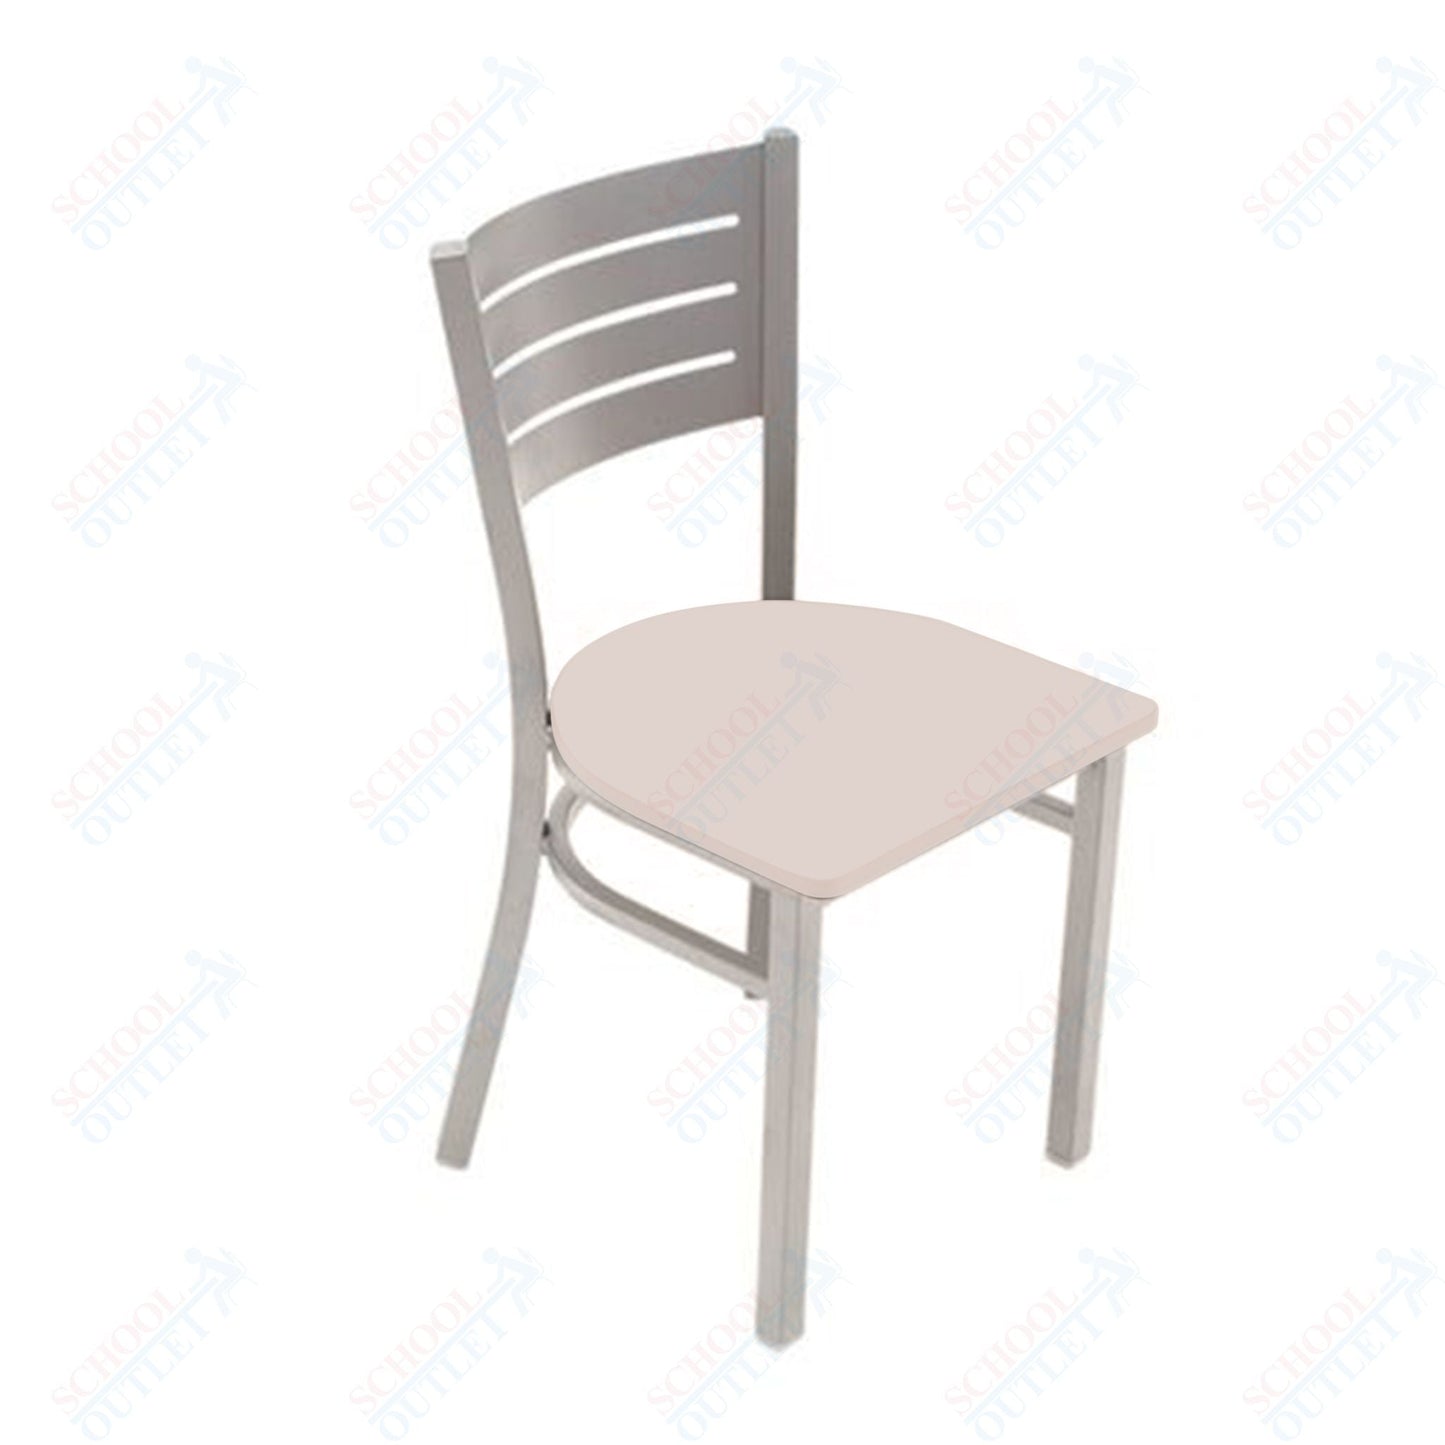 AmTab Cafe Chair - 16.5"W x 19"L x 33.5"H - Seat Height 18.25"H (AMT - CAFECHAIR - 2) - SchoolOutlet